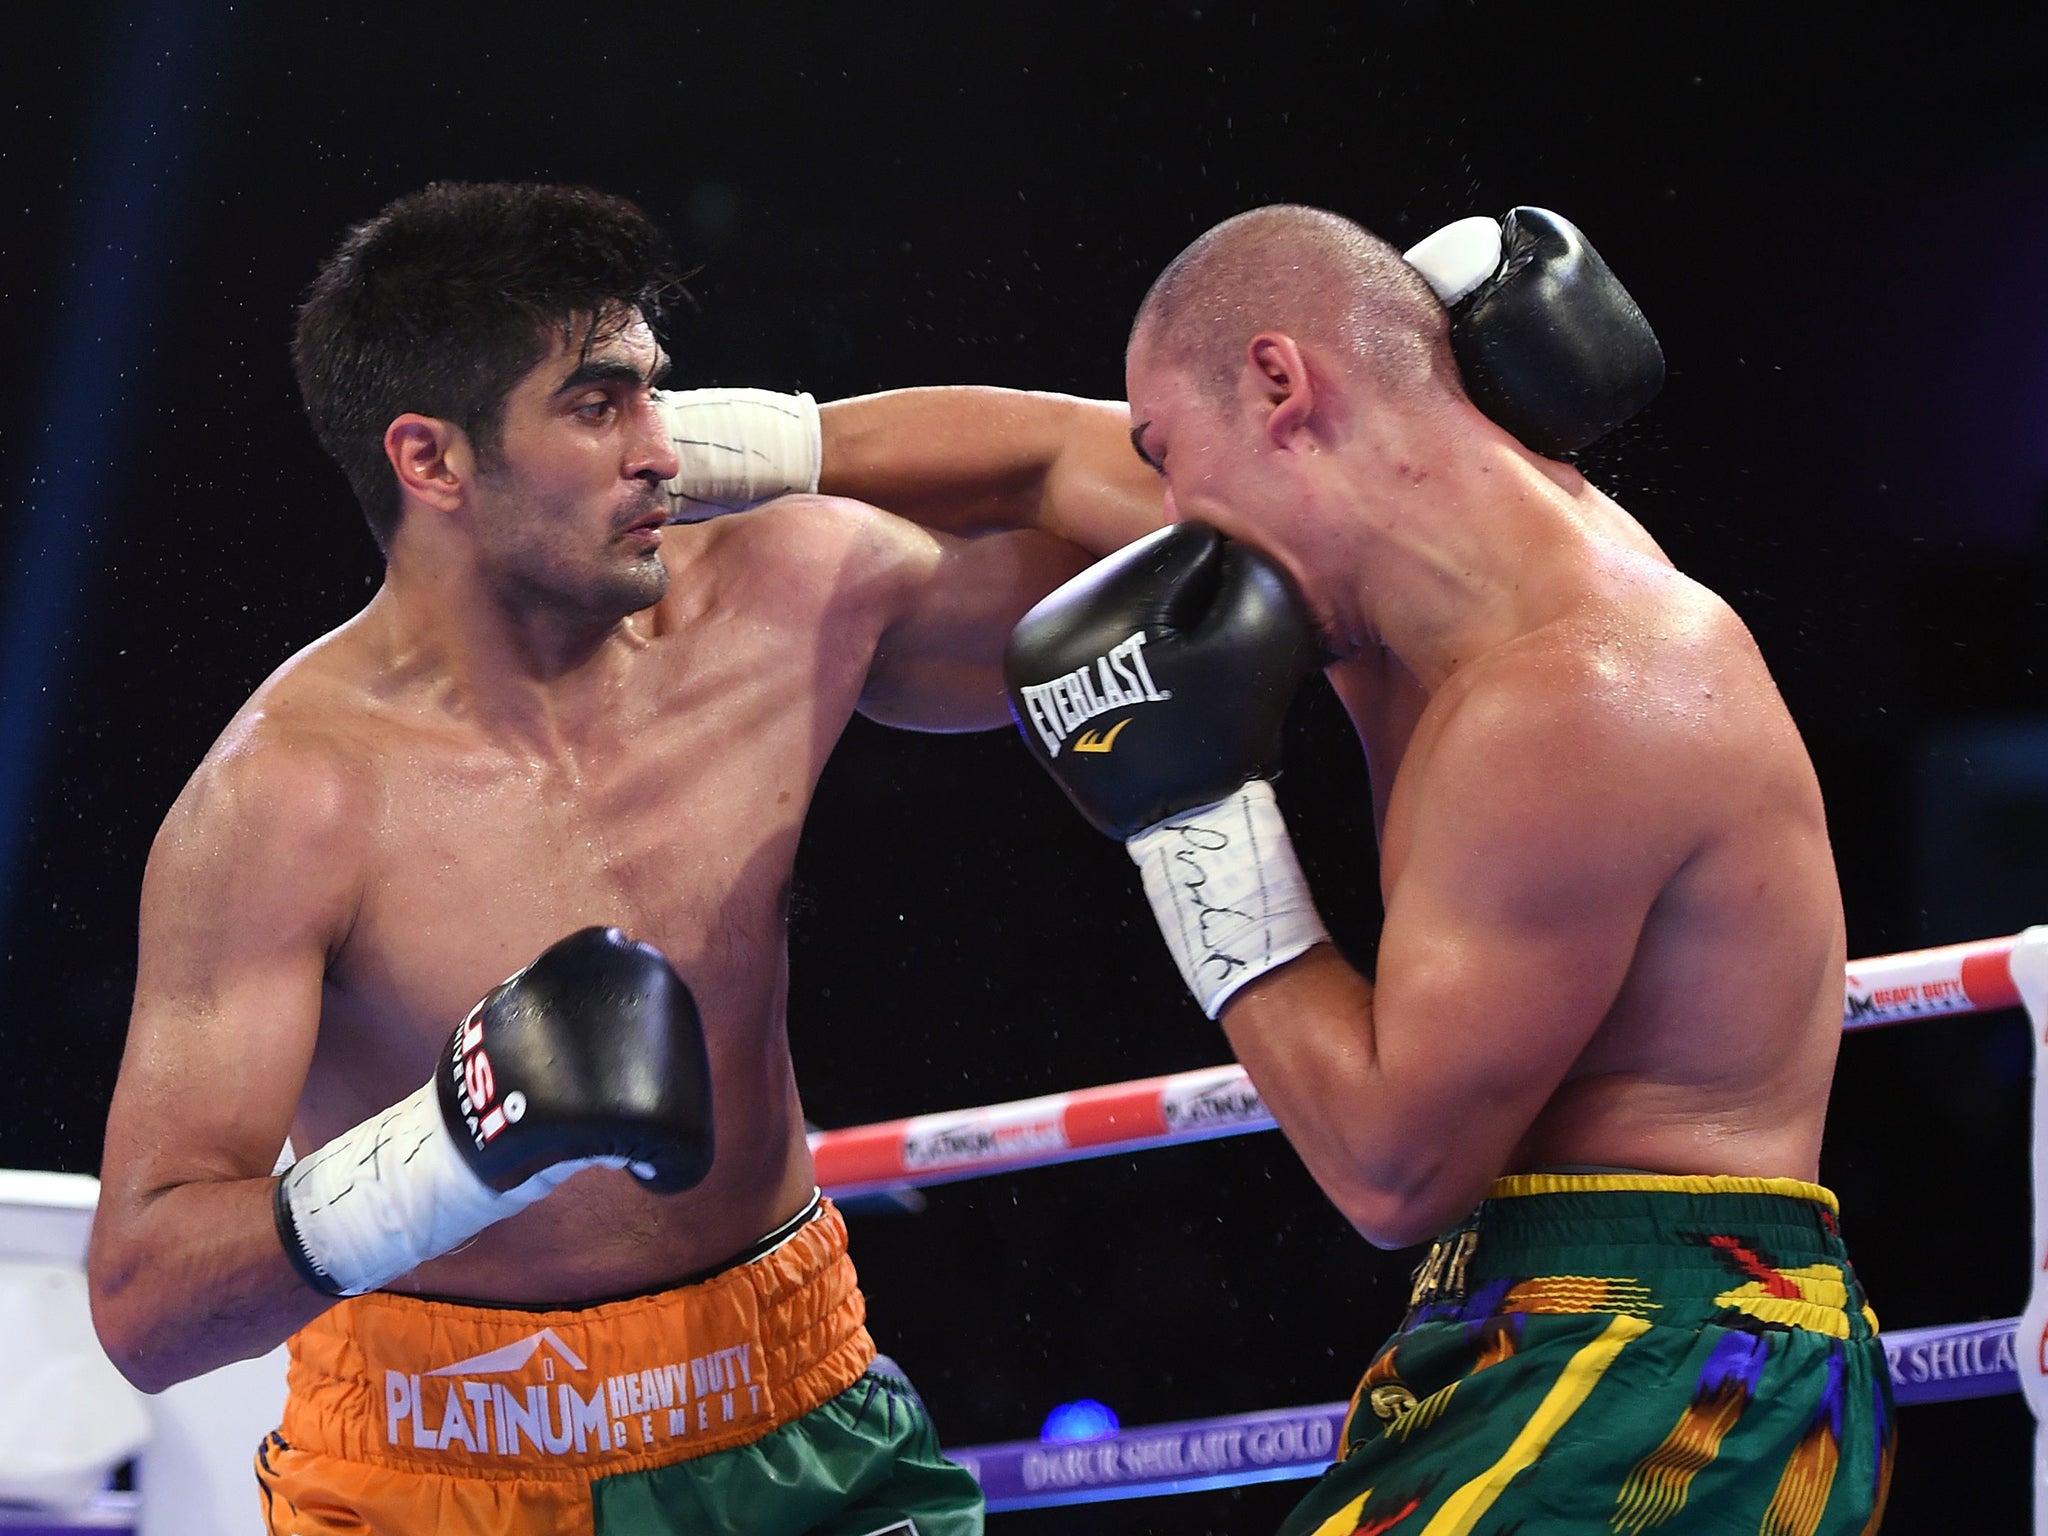 Indian boxer and WBO Asia-Pacific Super Middleweight champion Vijender Singh (L) throws a punch at WBO Oriental Super Middleweight champion of China Zulpikar Maimaitiali during their double title bout at the National Sports Complex of India (NSCI) Dome in Mumbai on August 5, 2017. / AFP PHOTO / PUNIT PARANJPEPUNIT